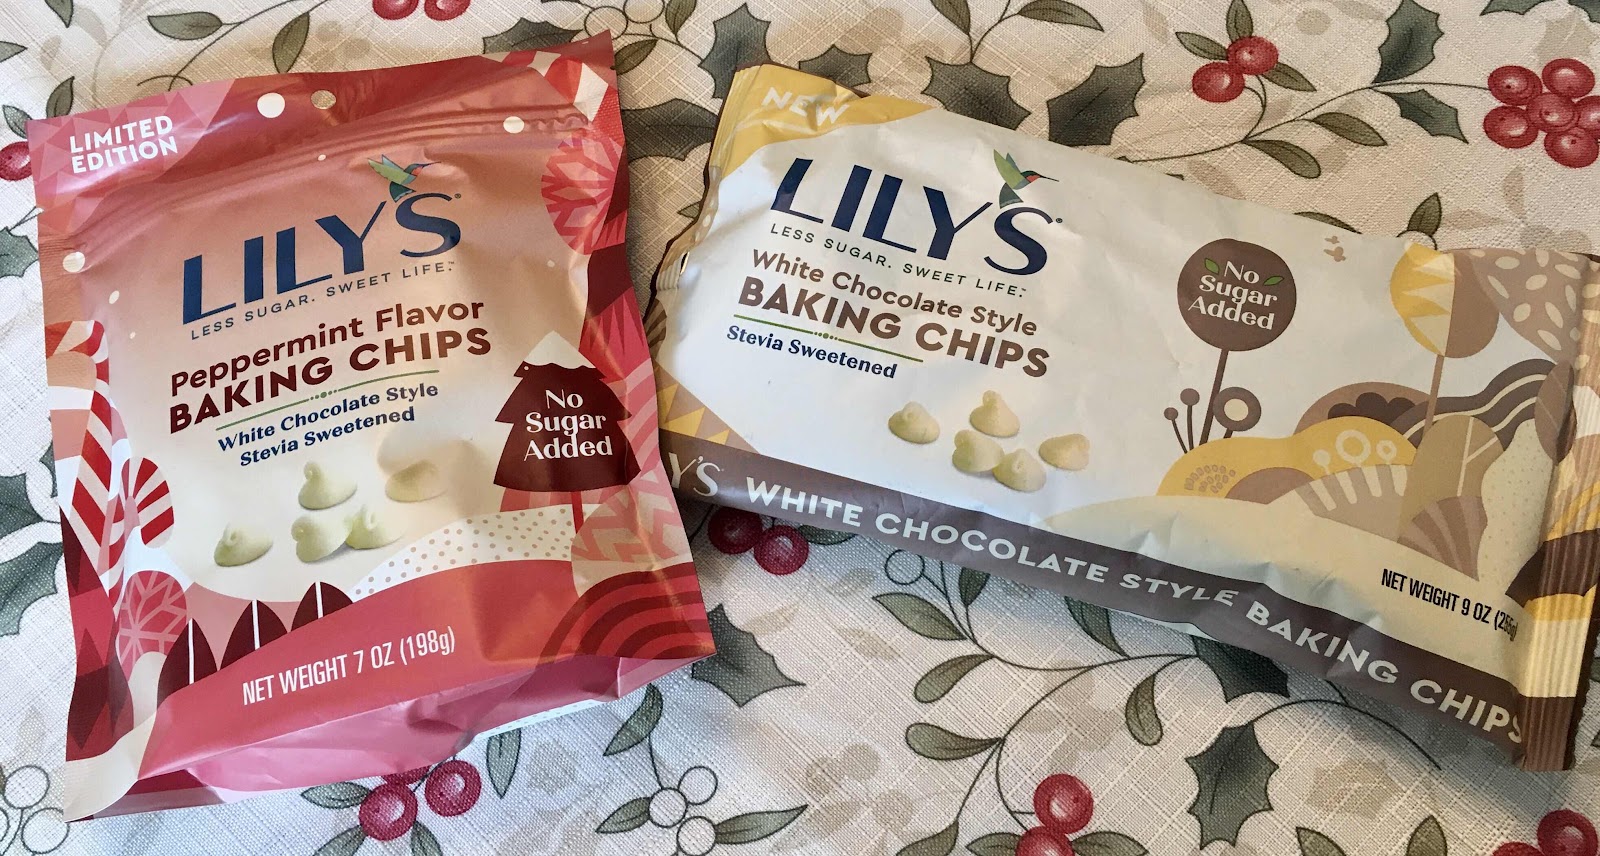 Lily’s sugar free white chocolate baking chips